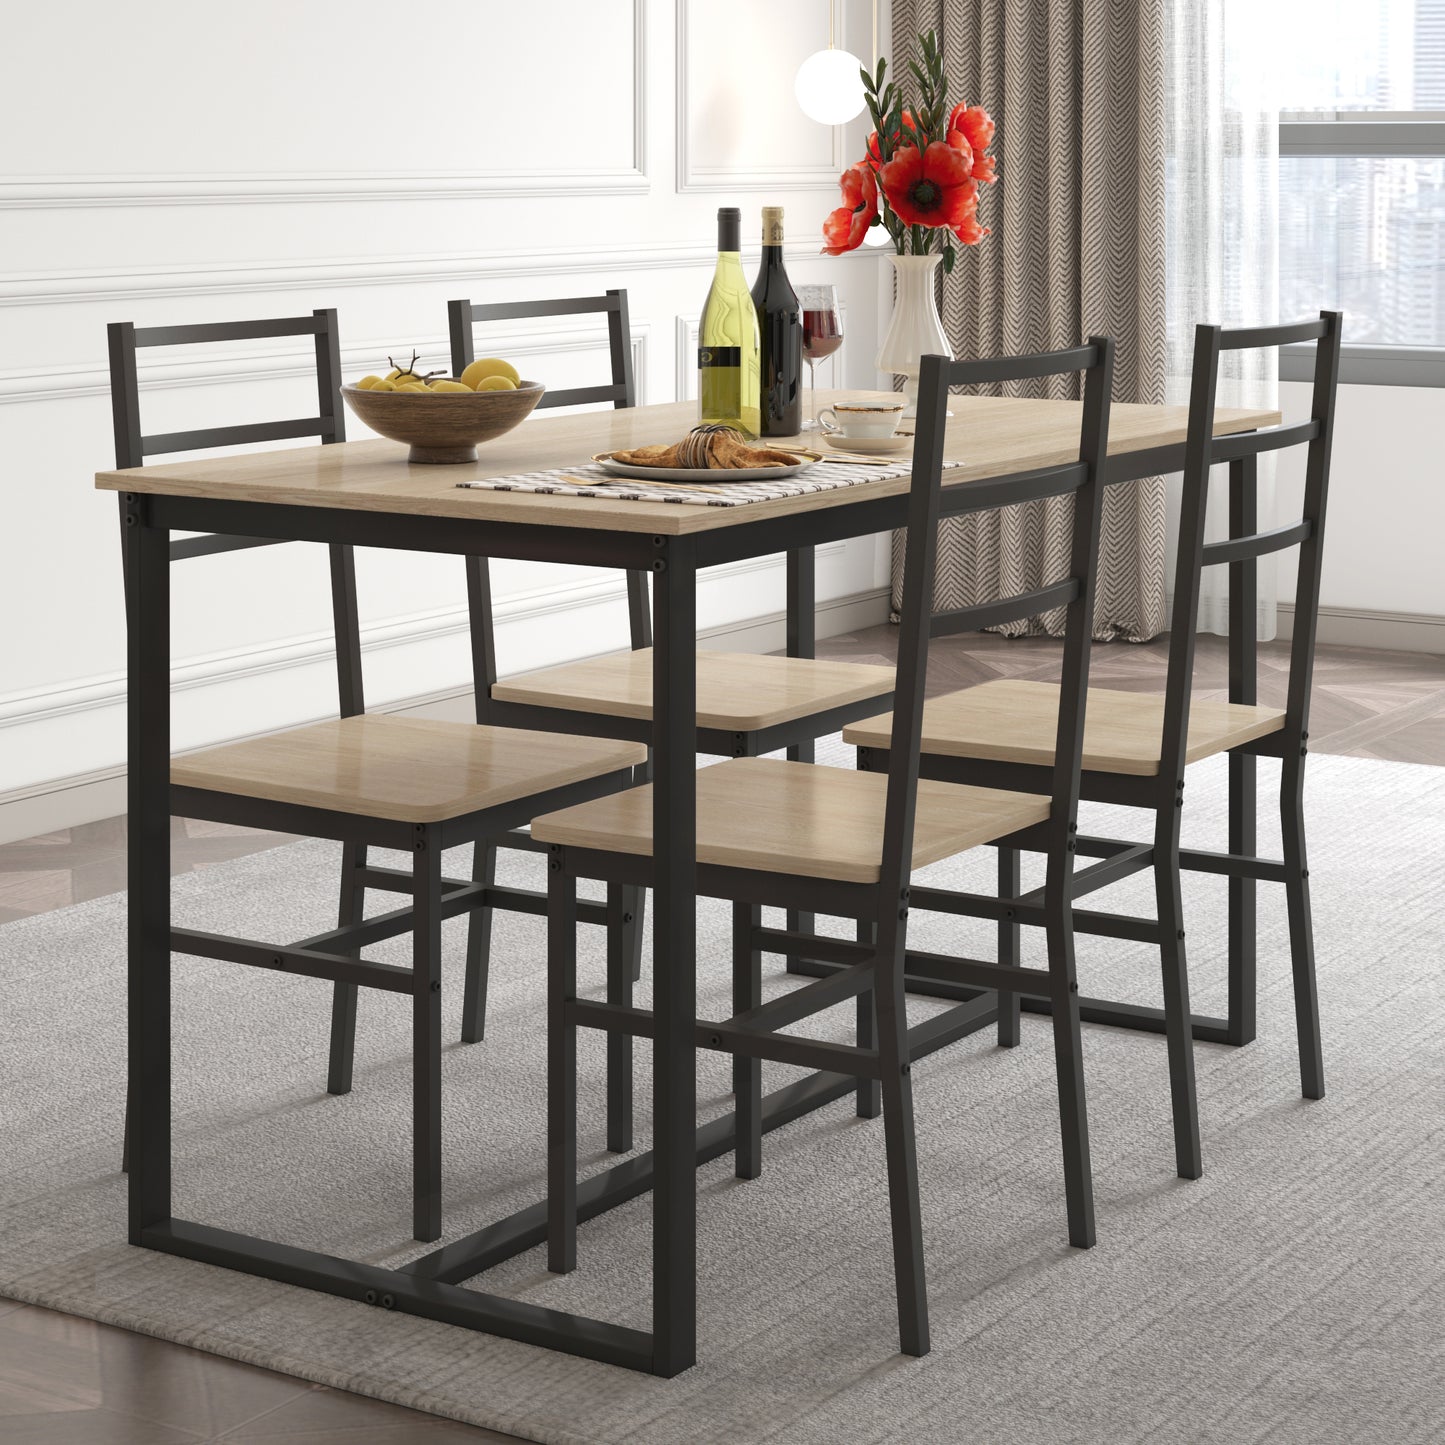 5 Piece Dining Table Set for 4, Dining Room Table Set, Modern Rustic Table Set with 4 Chairs, Wooden Tabletop and Metal Frame, Home Kitchen Breakfast Table and Chairs Set, D6115